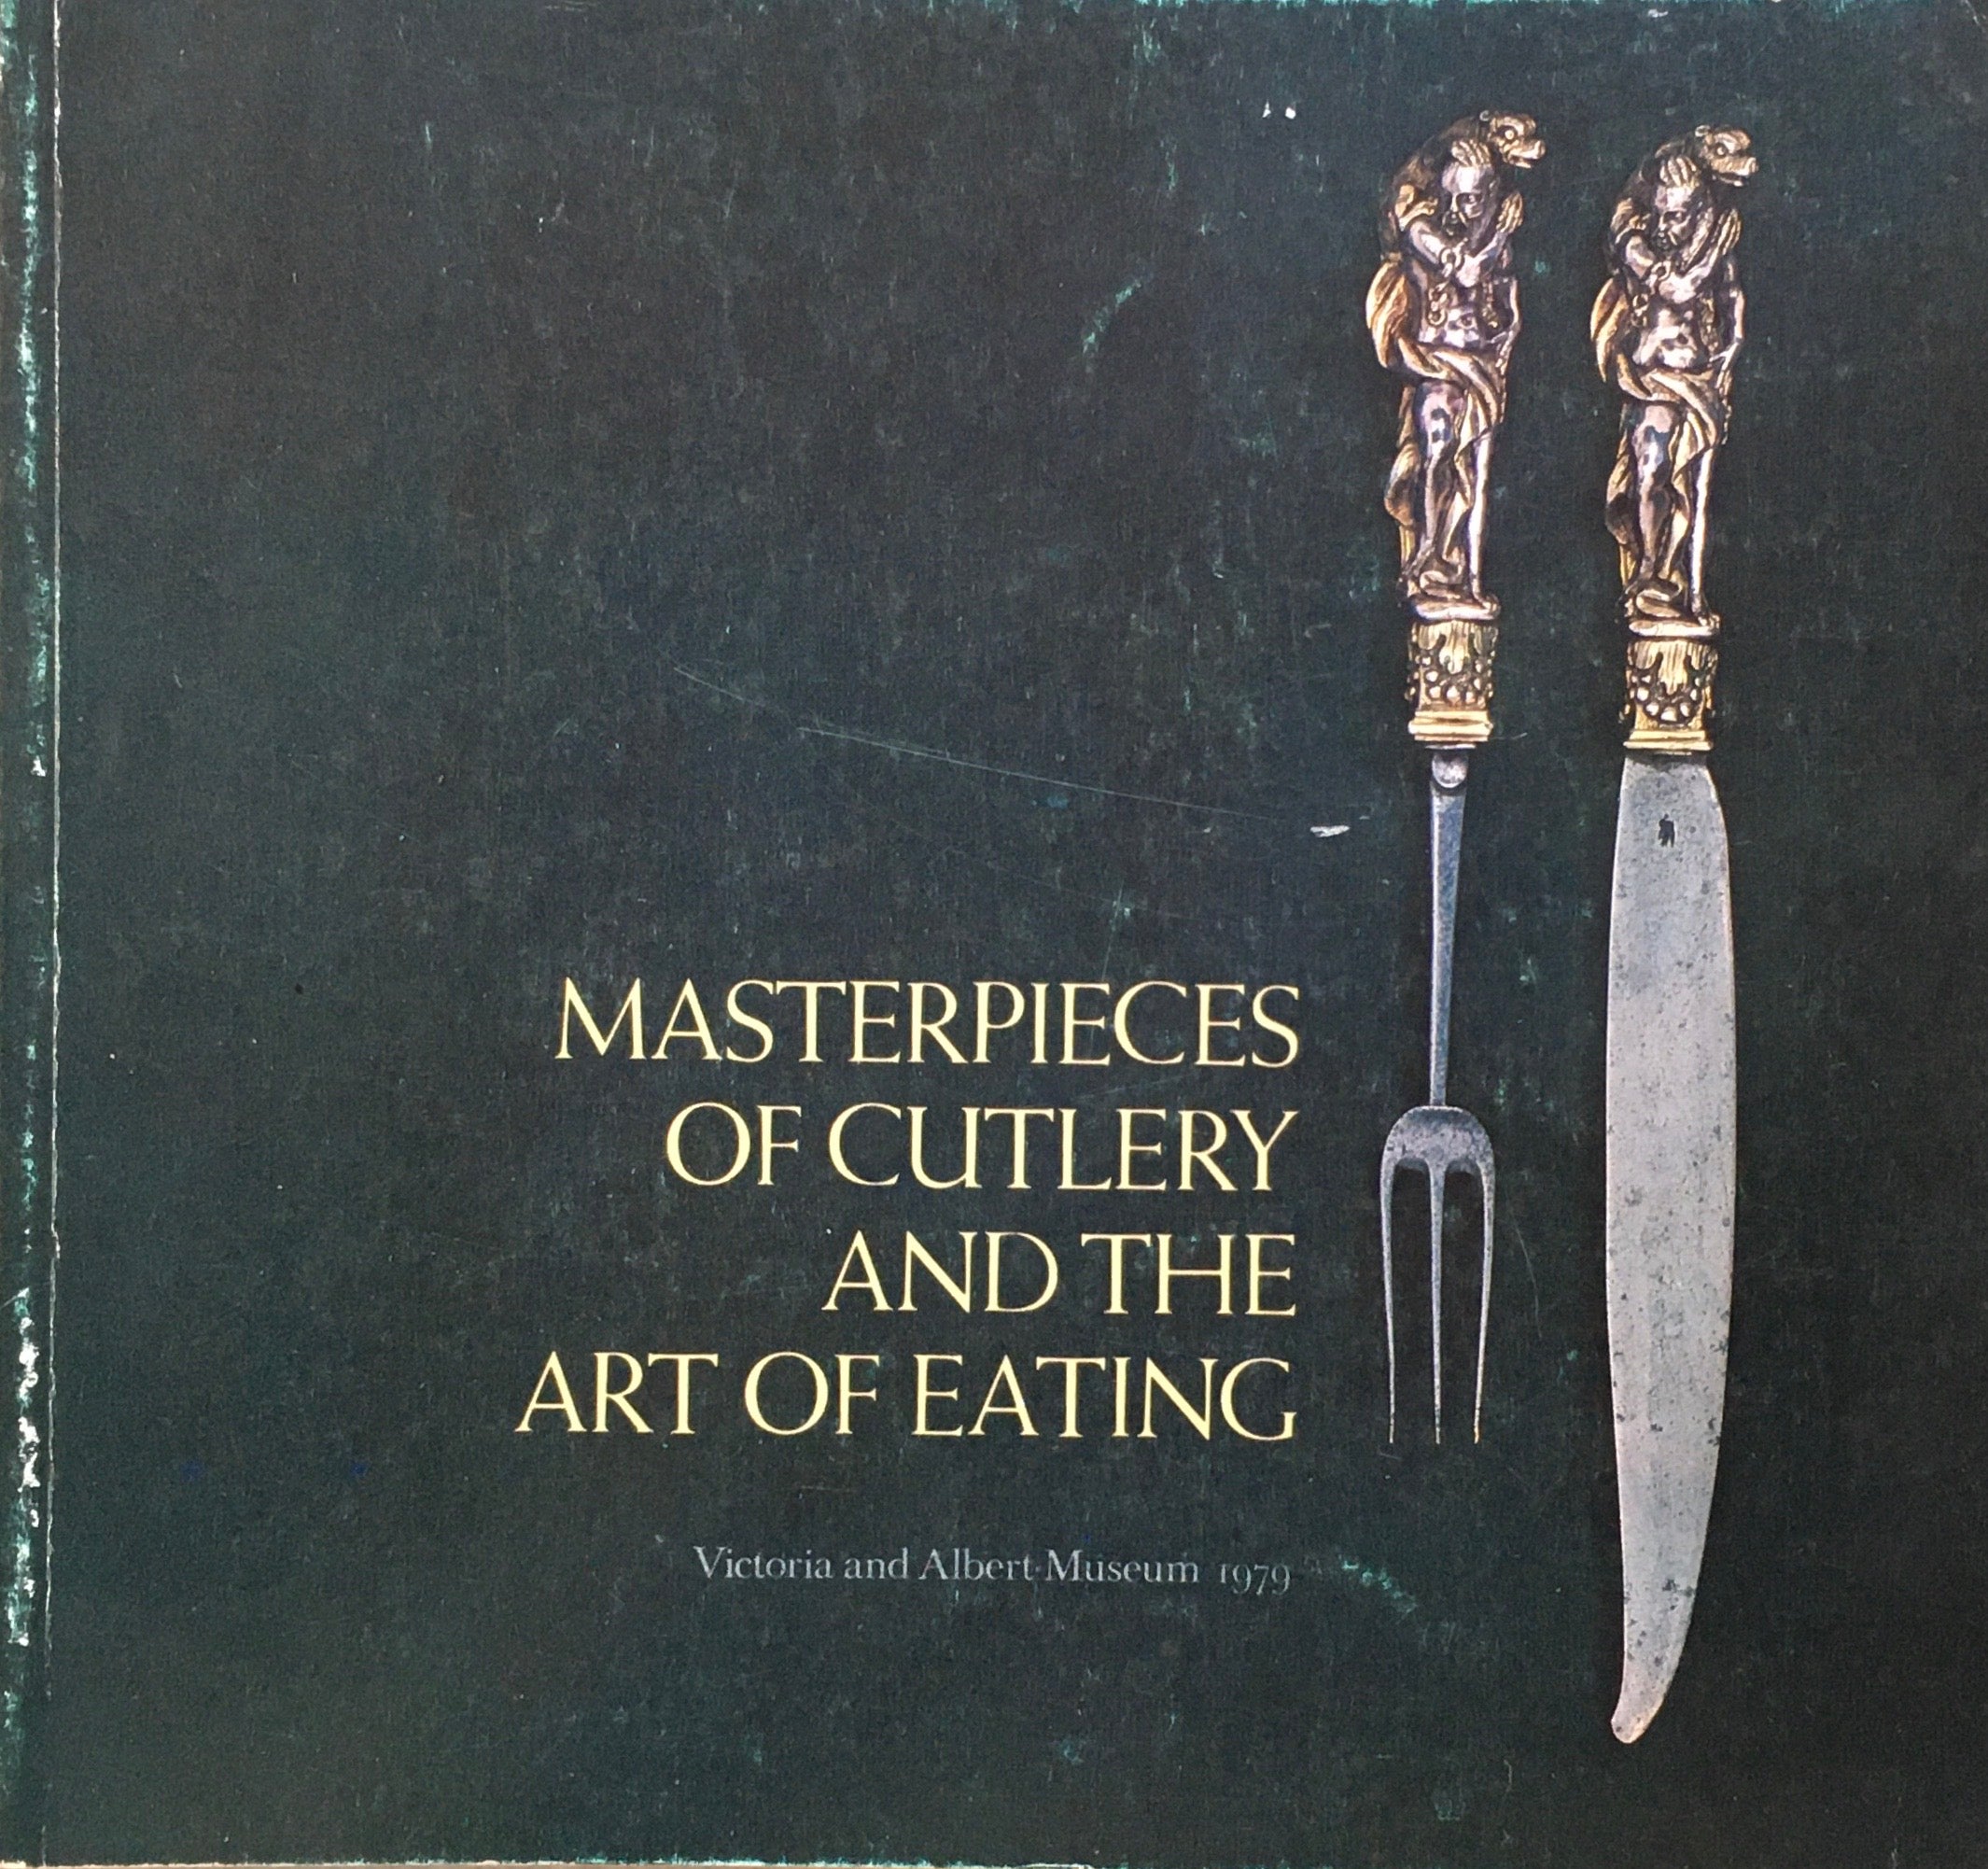 Masterpieces of Cutlery and the Art of Eating V&A – smokebooks shop